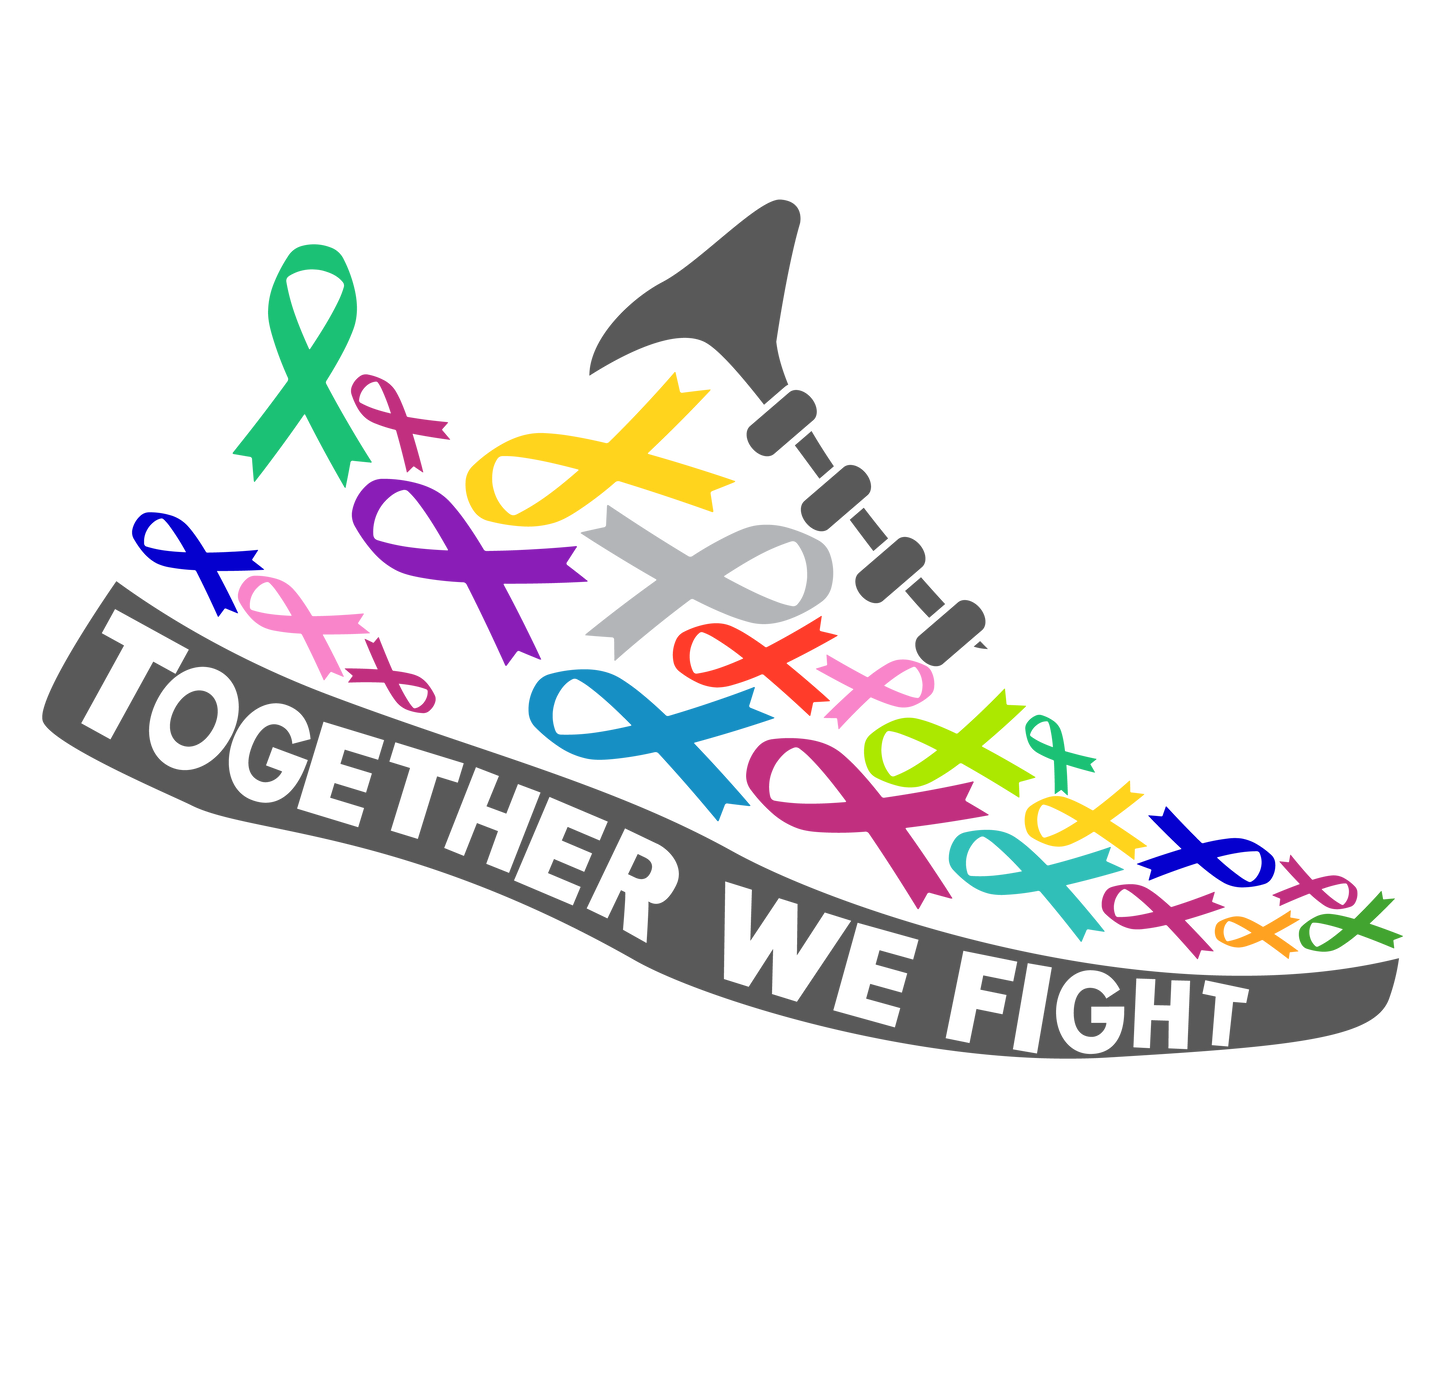 TOGETHER WE FIGHT SHOES - CANCER AWARENESS